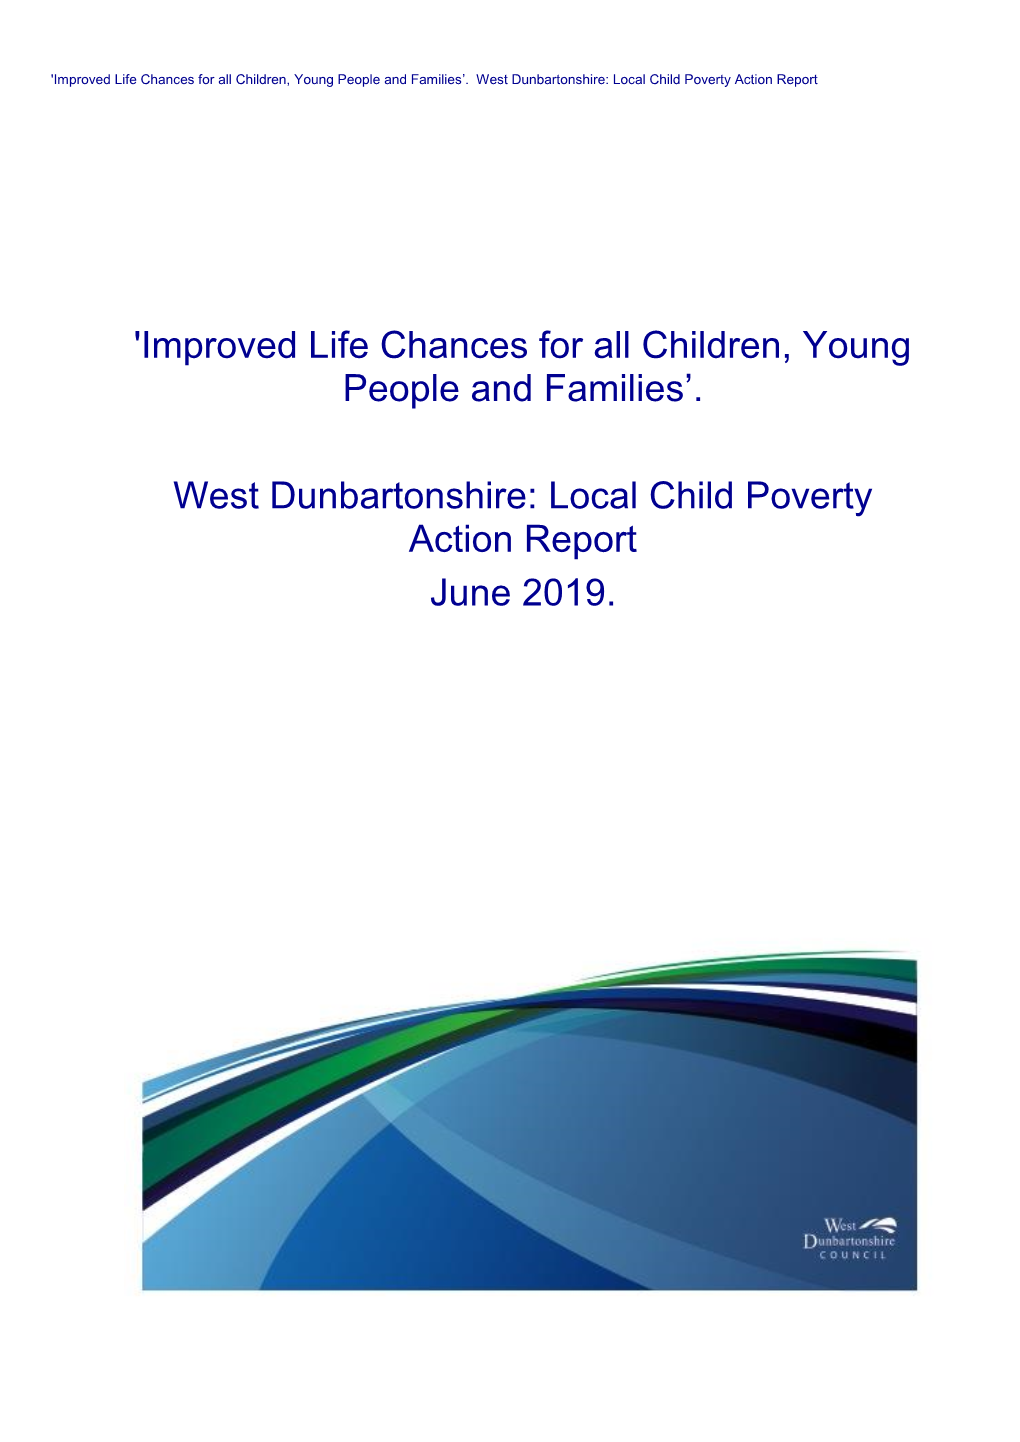 Local Child Poverty Action Report